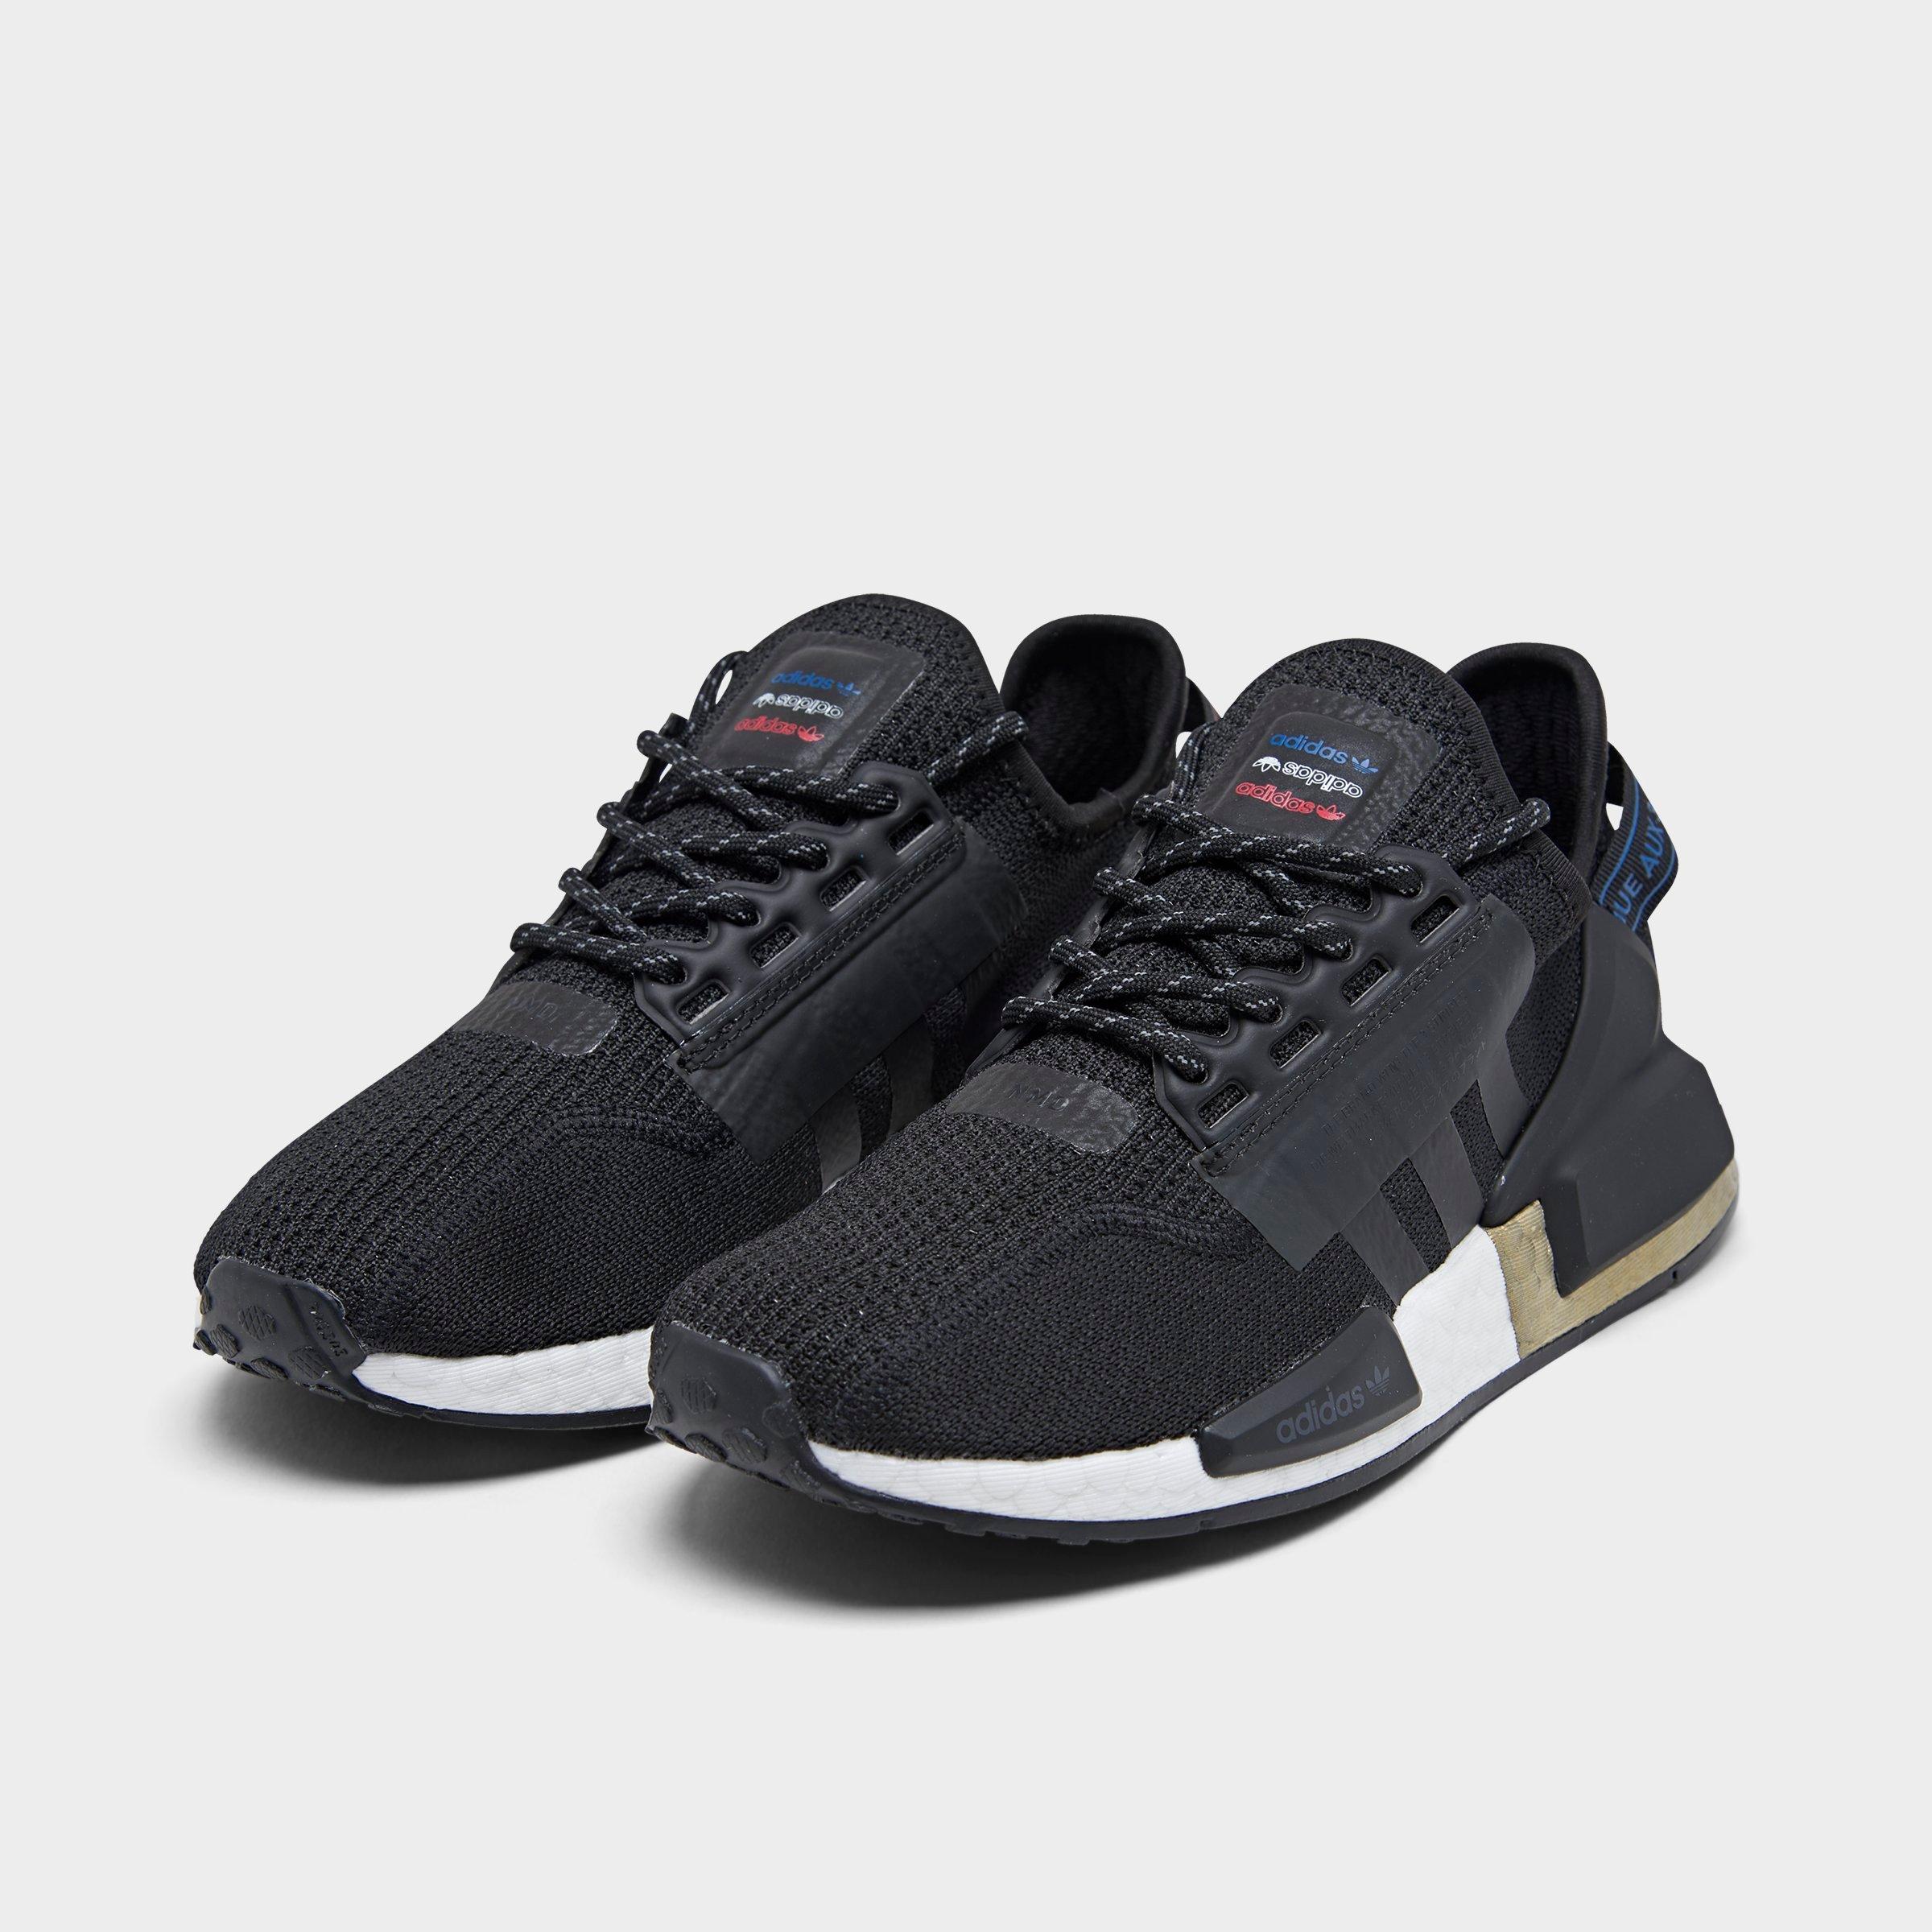 Adidas Nmd Xr1 and Original Ready Stock Shopee Indonesia